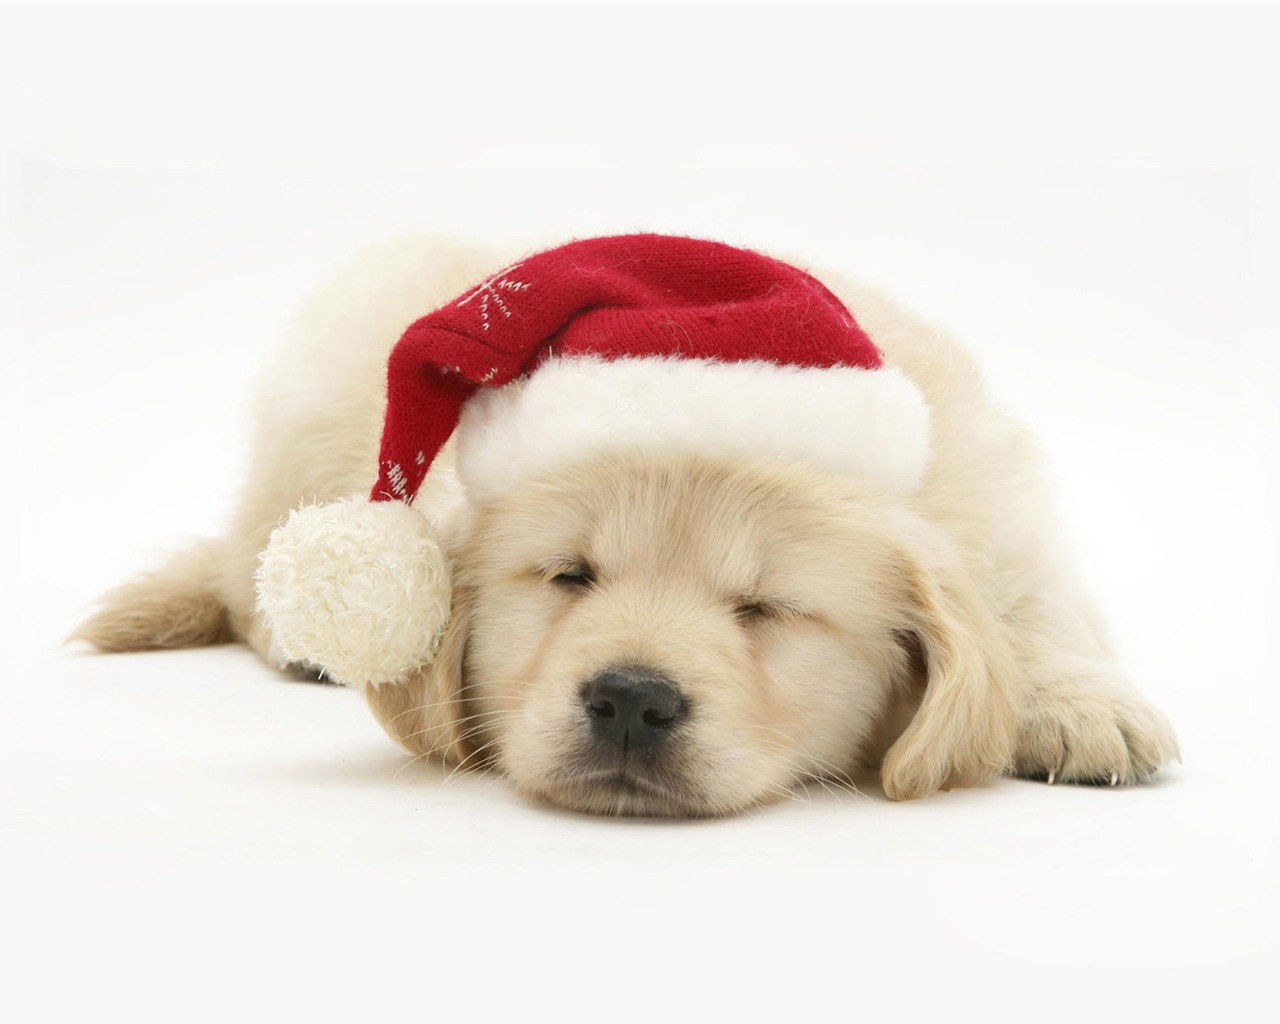 Puppy Photo HD wallpapers (8) #3 - 1280x1024